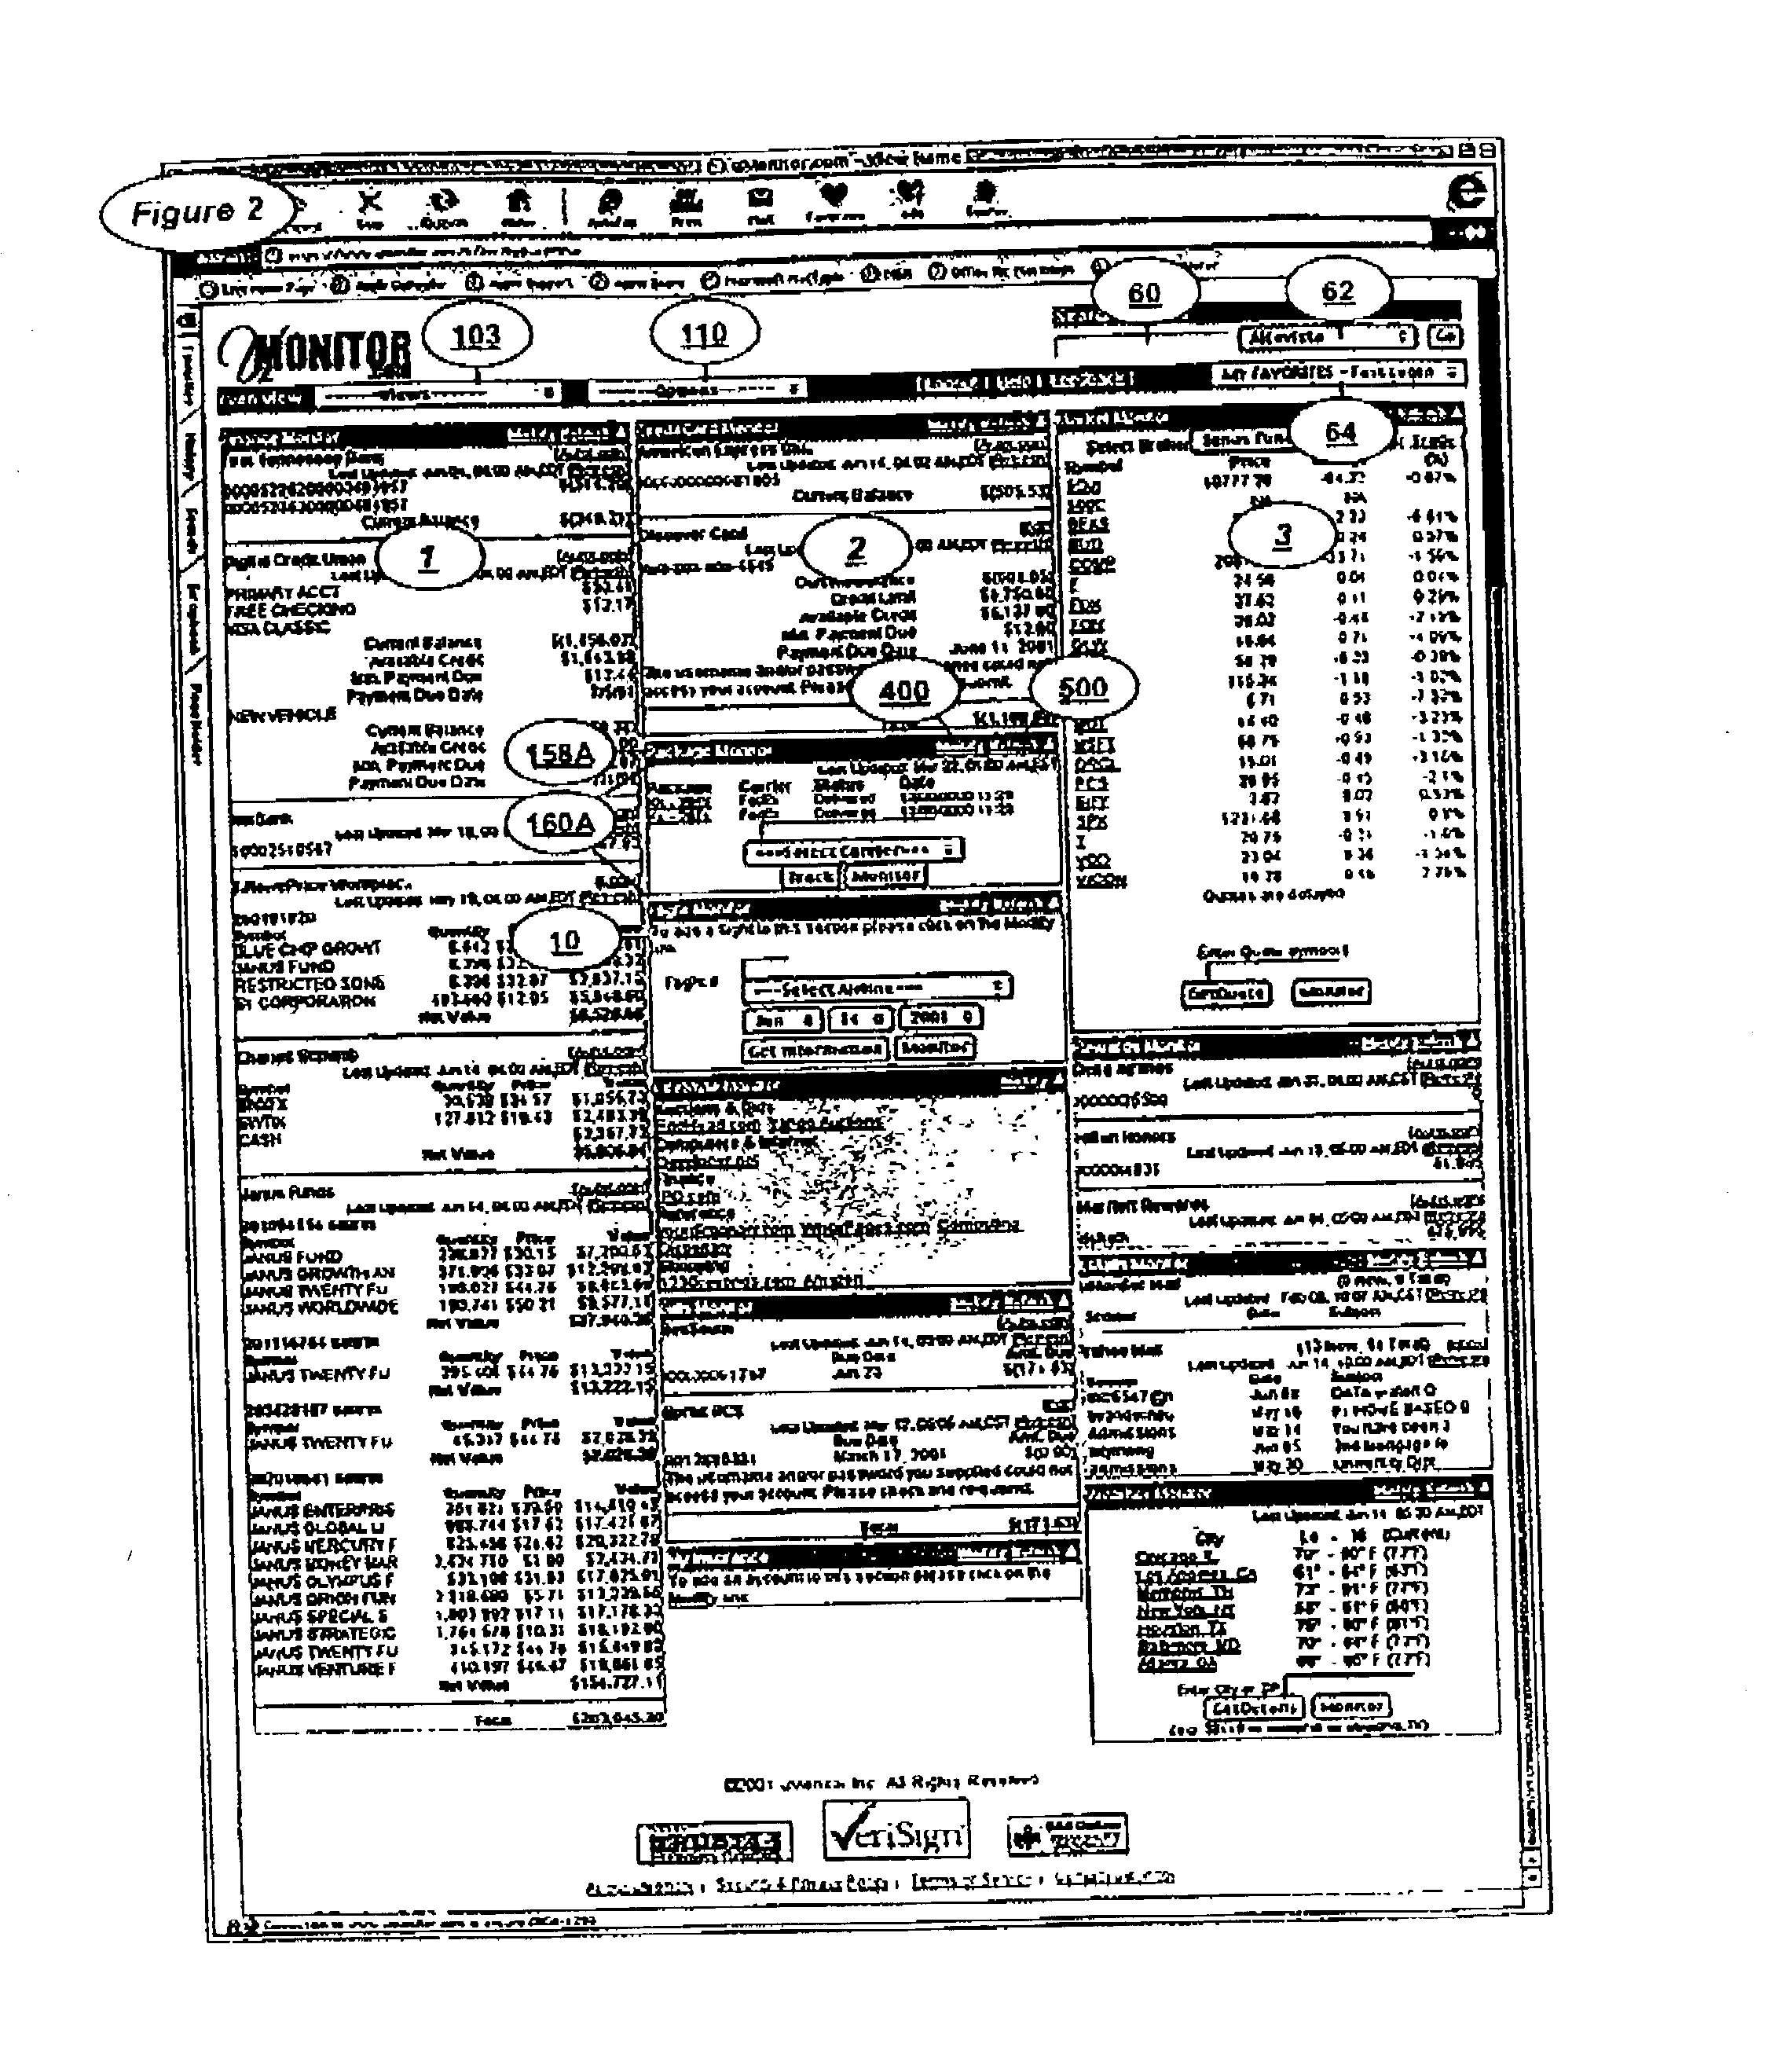 Secure selective sharing of account information on an internet information aggregation system